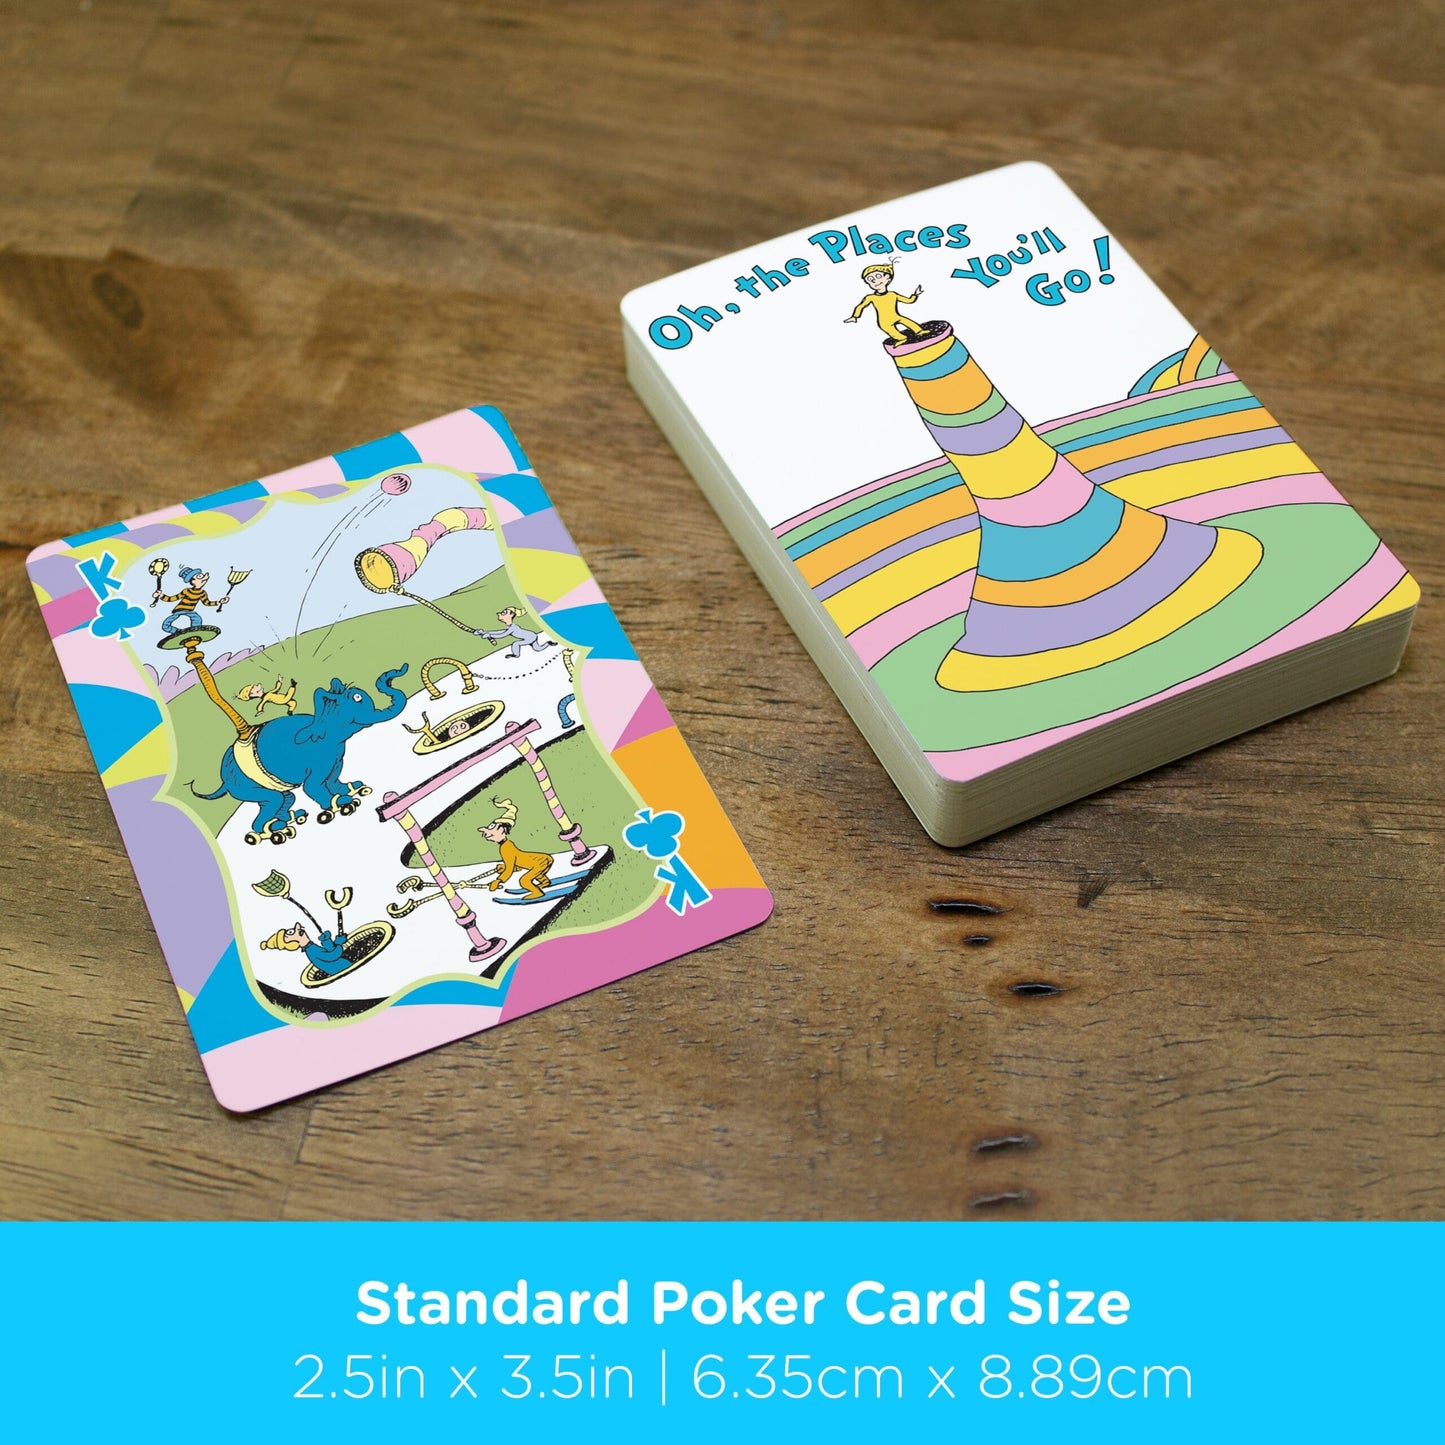 Oh, The Places You'll Go! Playing Cards